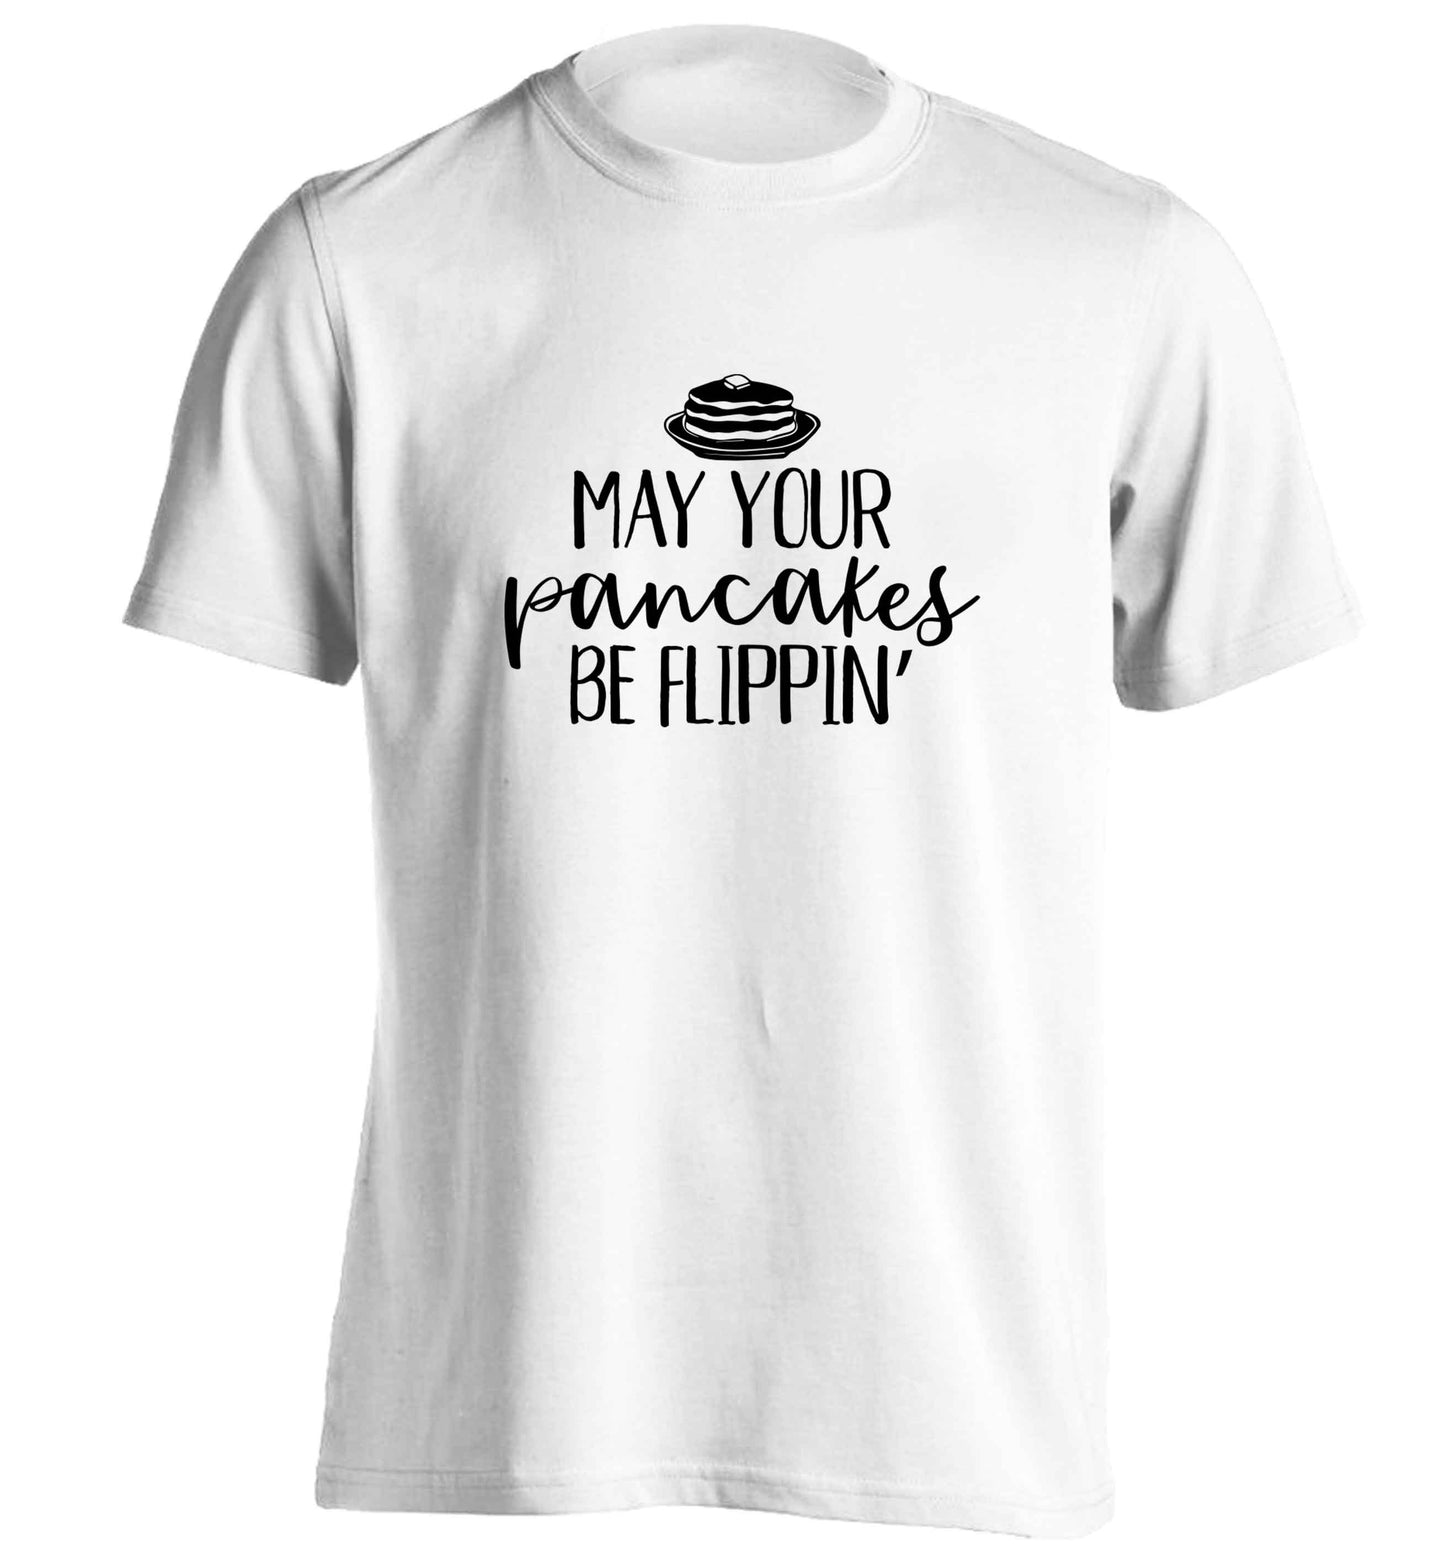 May your pancakes be flippin' adults unisex white Tshirt 2XL